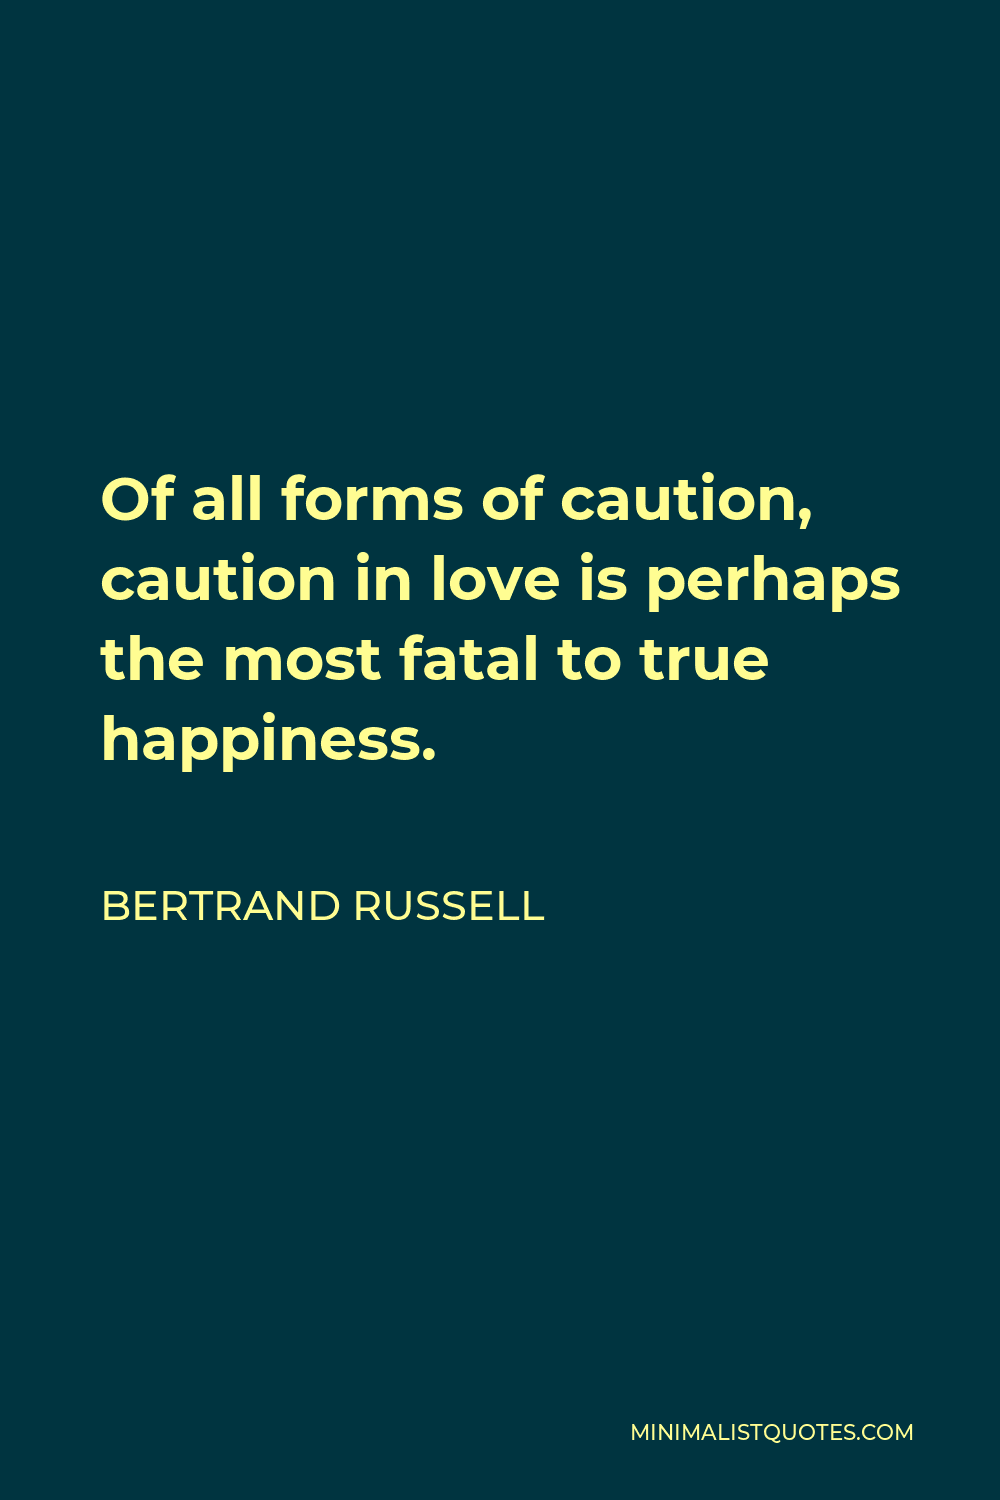 Bertrand Russell Quote: Of all forms of caution, caution in love is ...